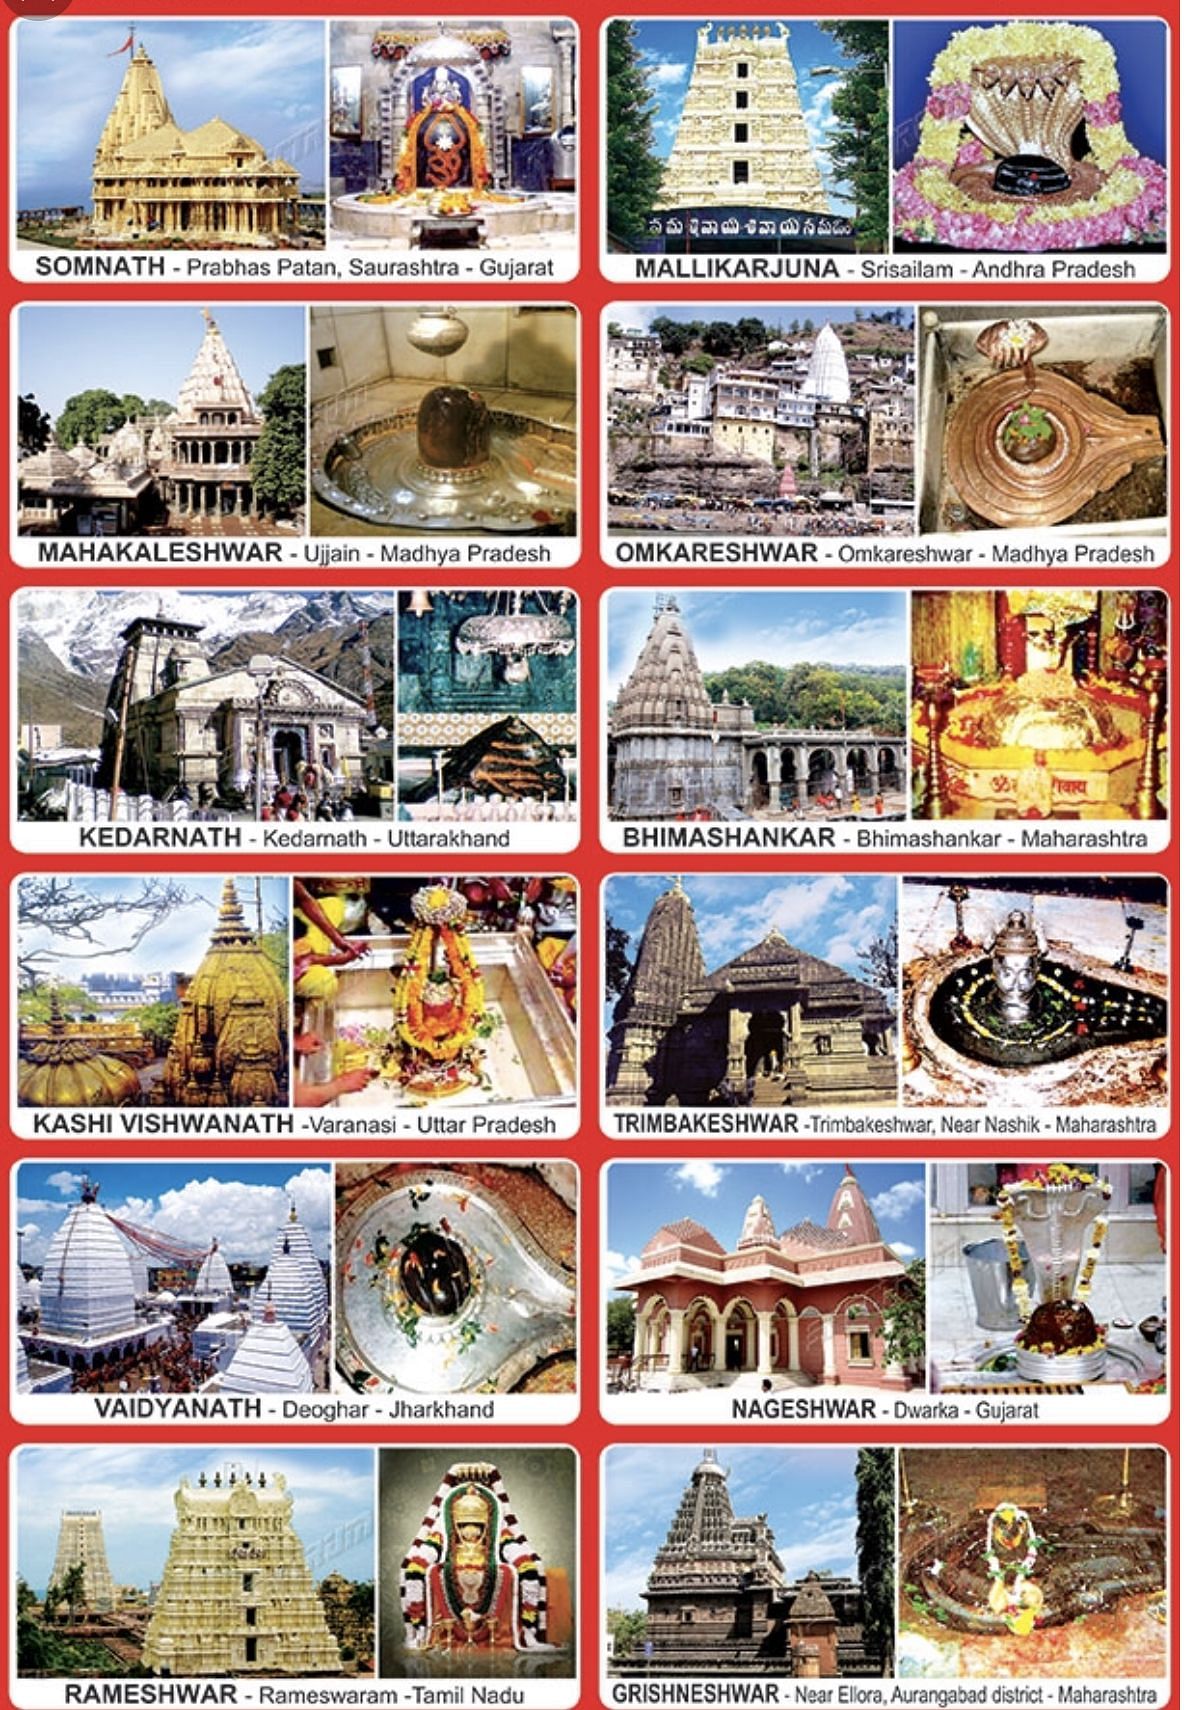 Jyotirlingas : Know about the 12 jyotirlingas and their specialties